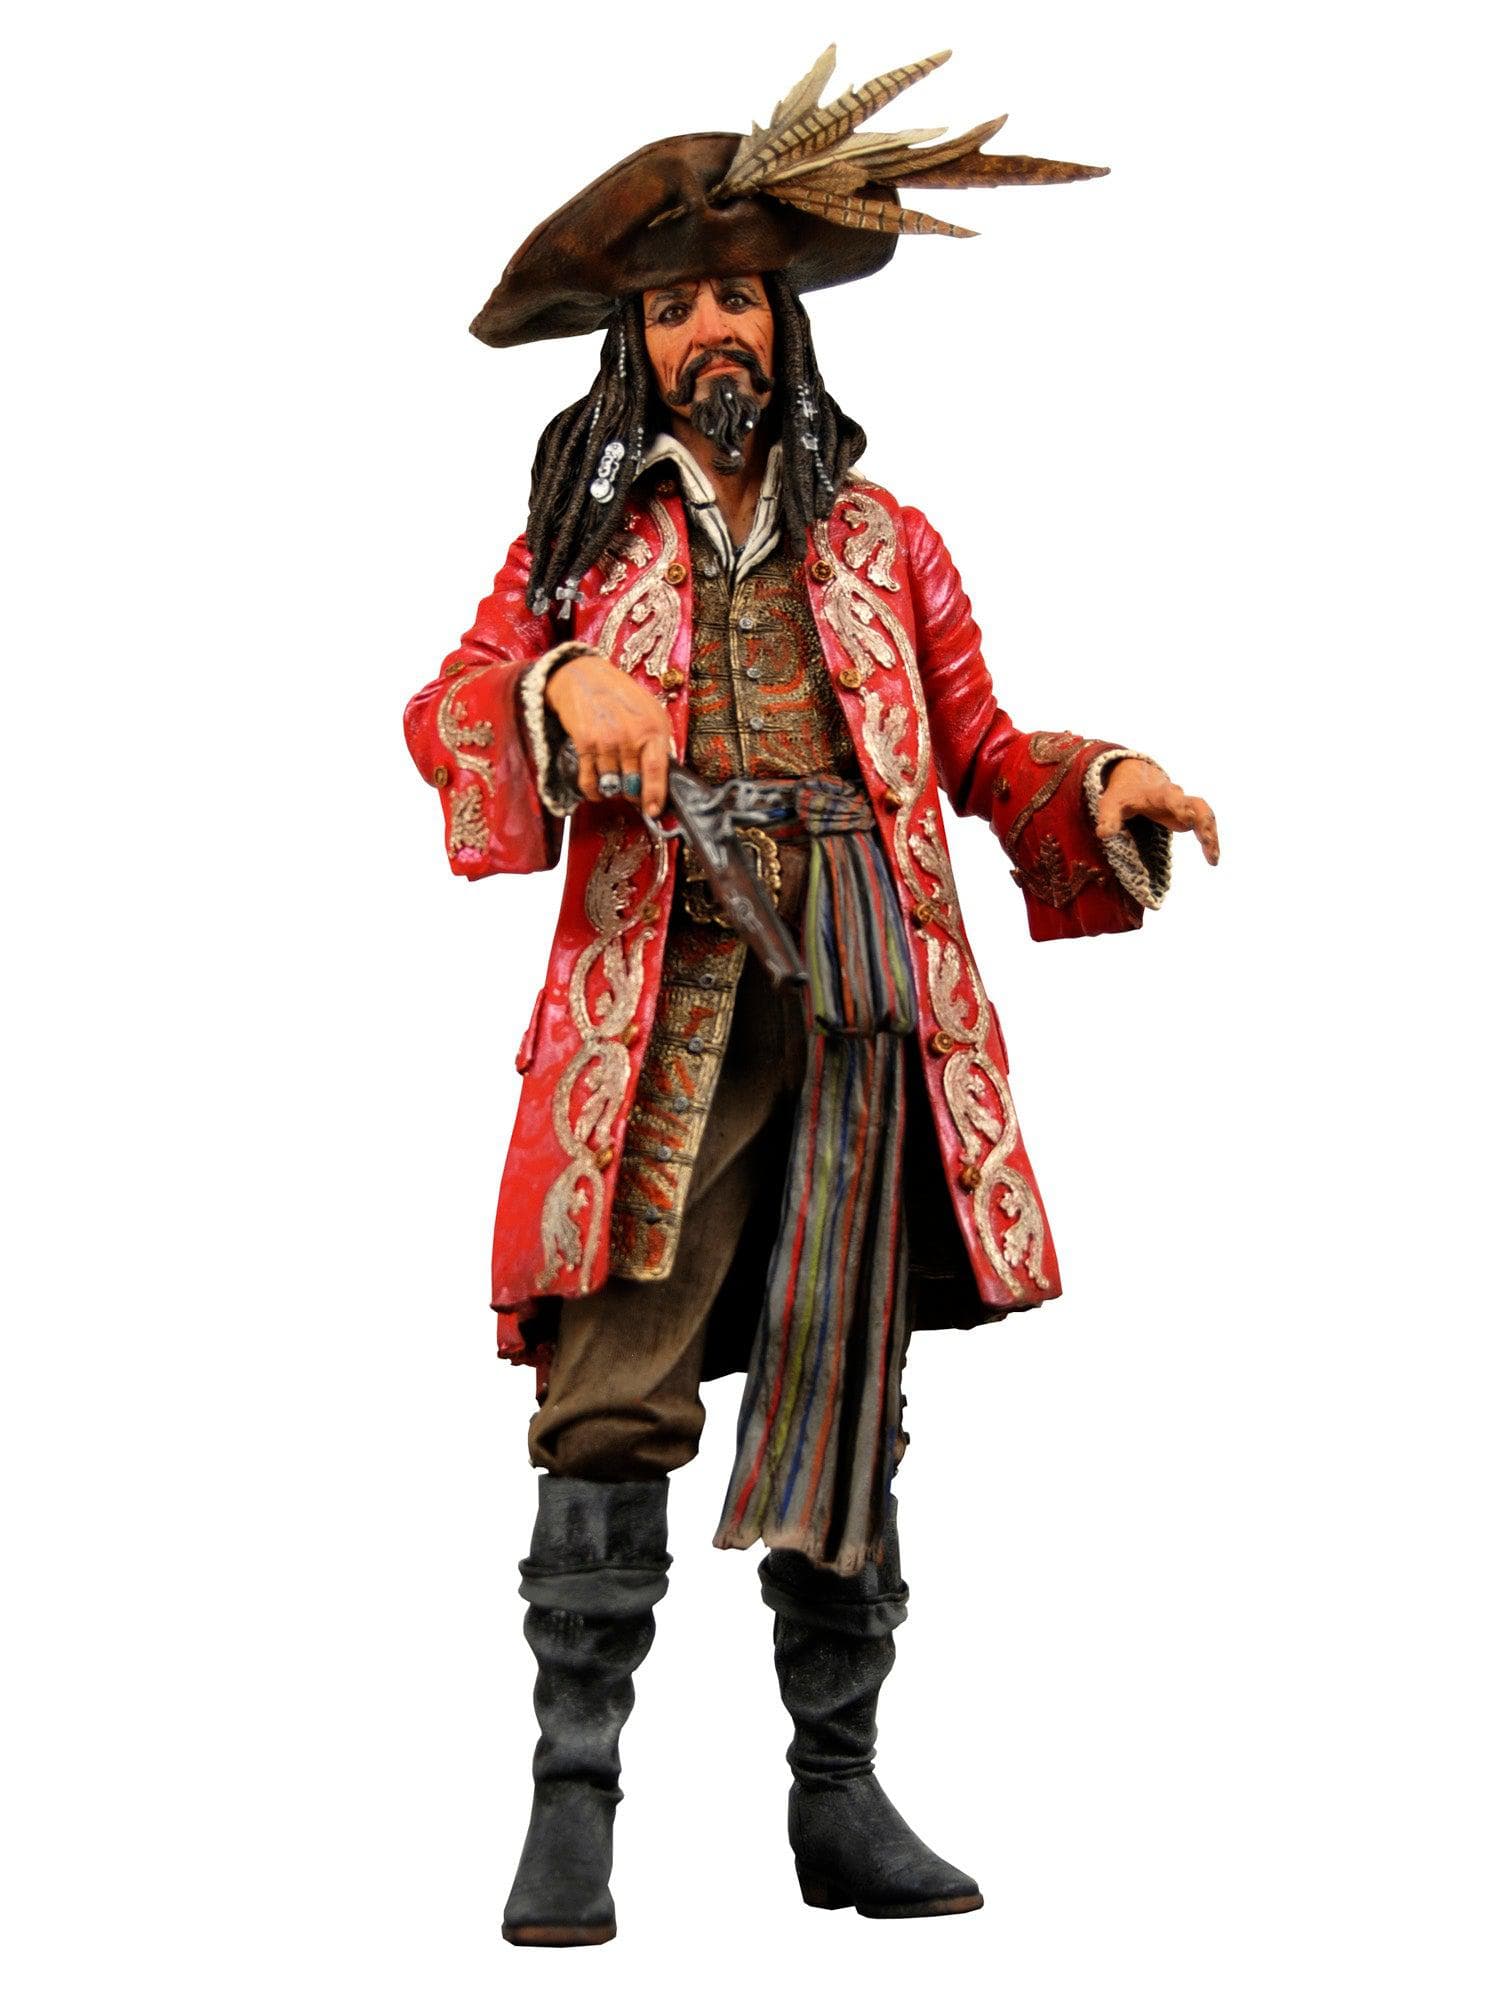 NECA - POTC: At World's End - 7" Action Figure - Series 2 Teague - costumes.com